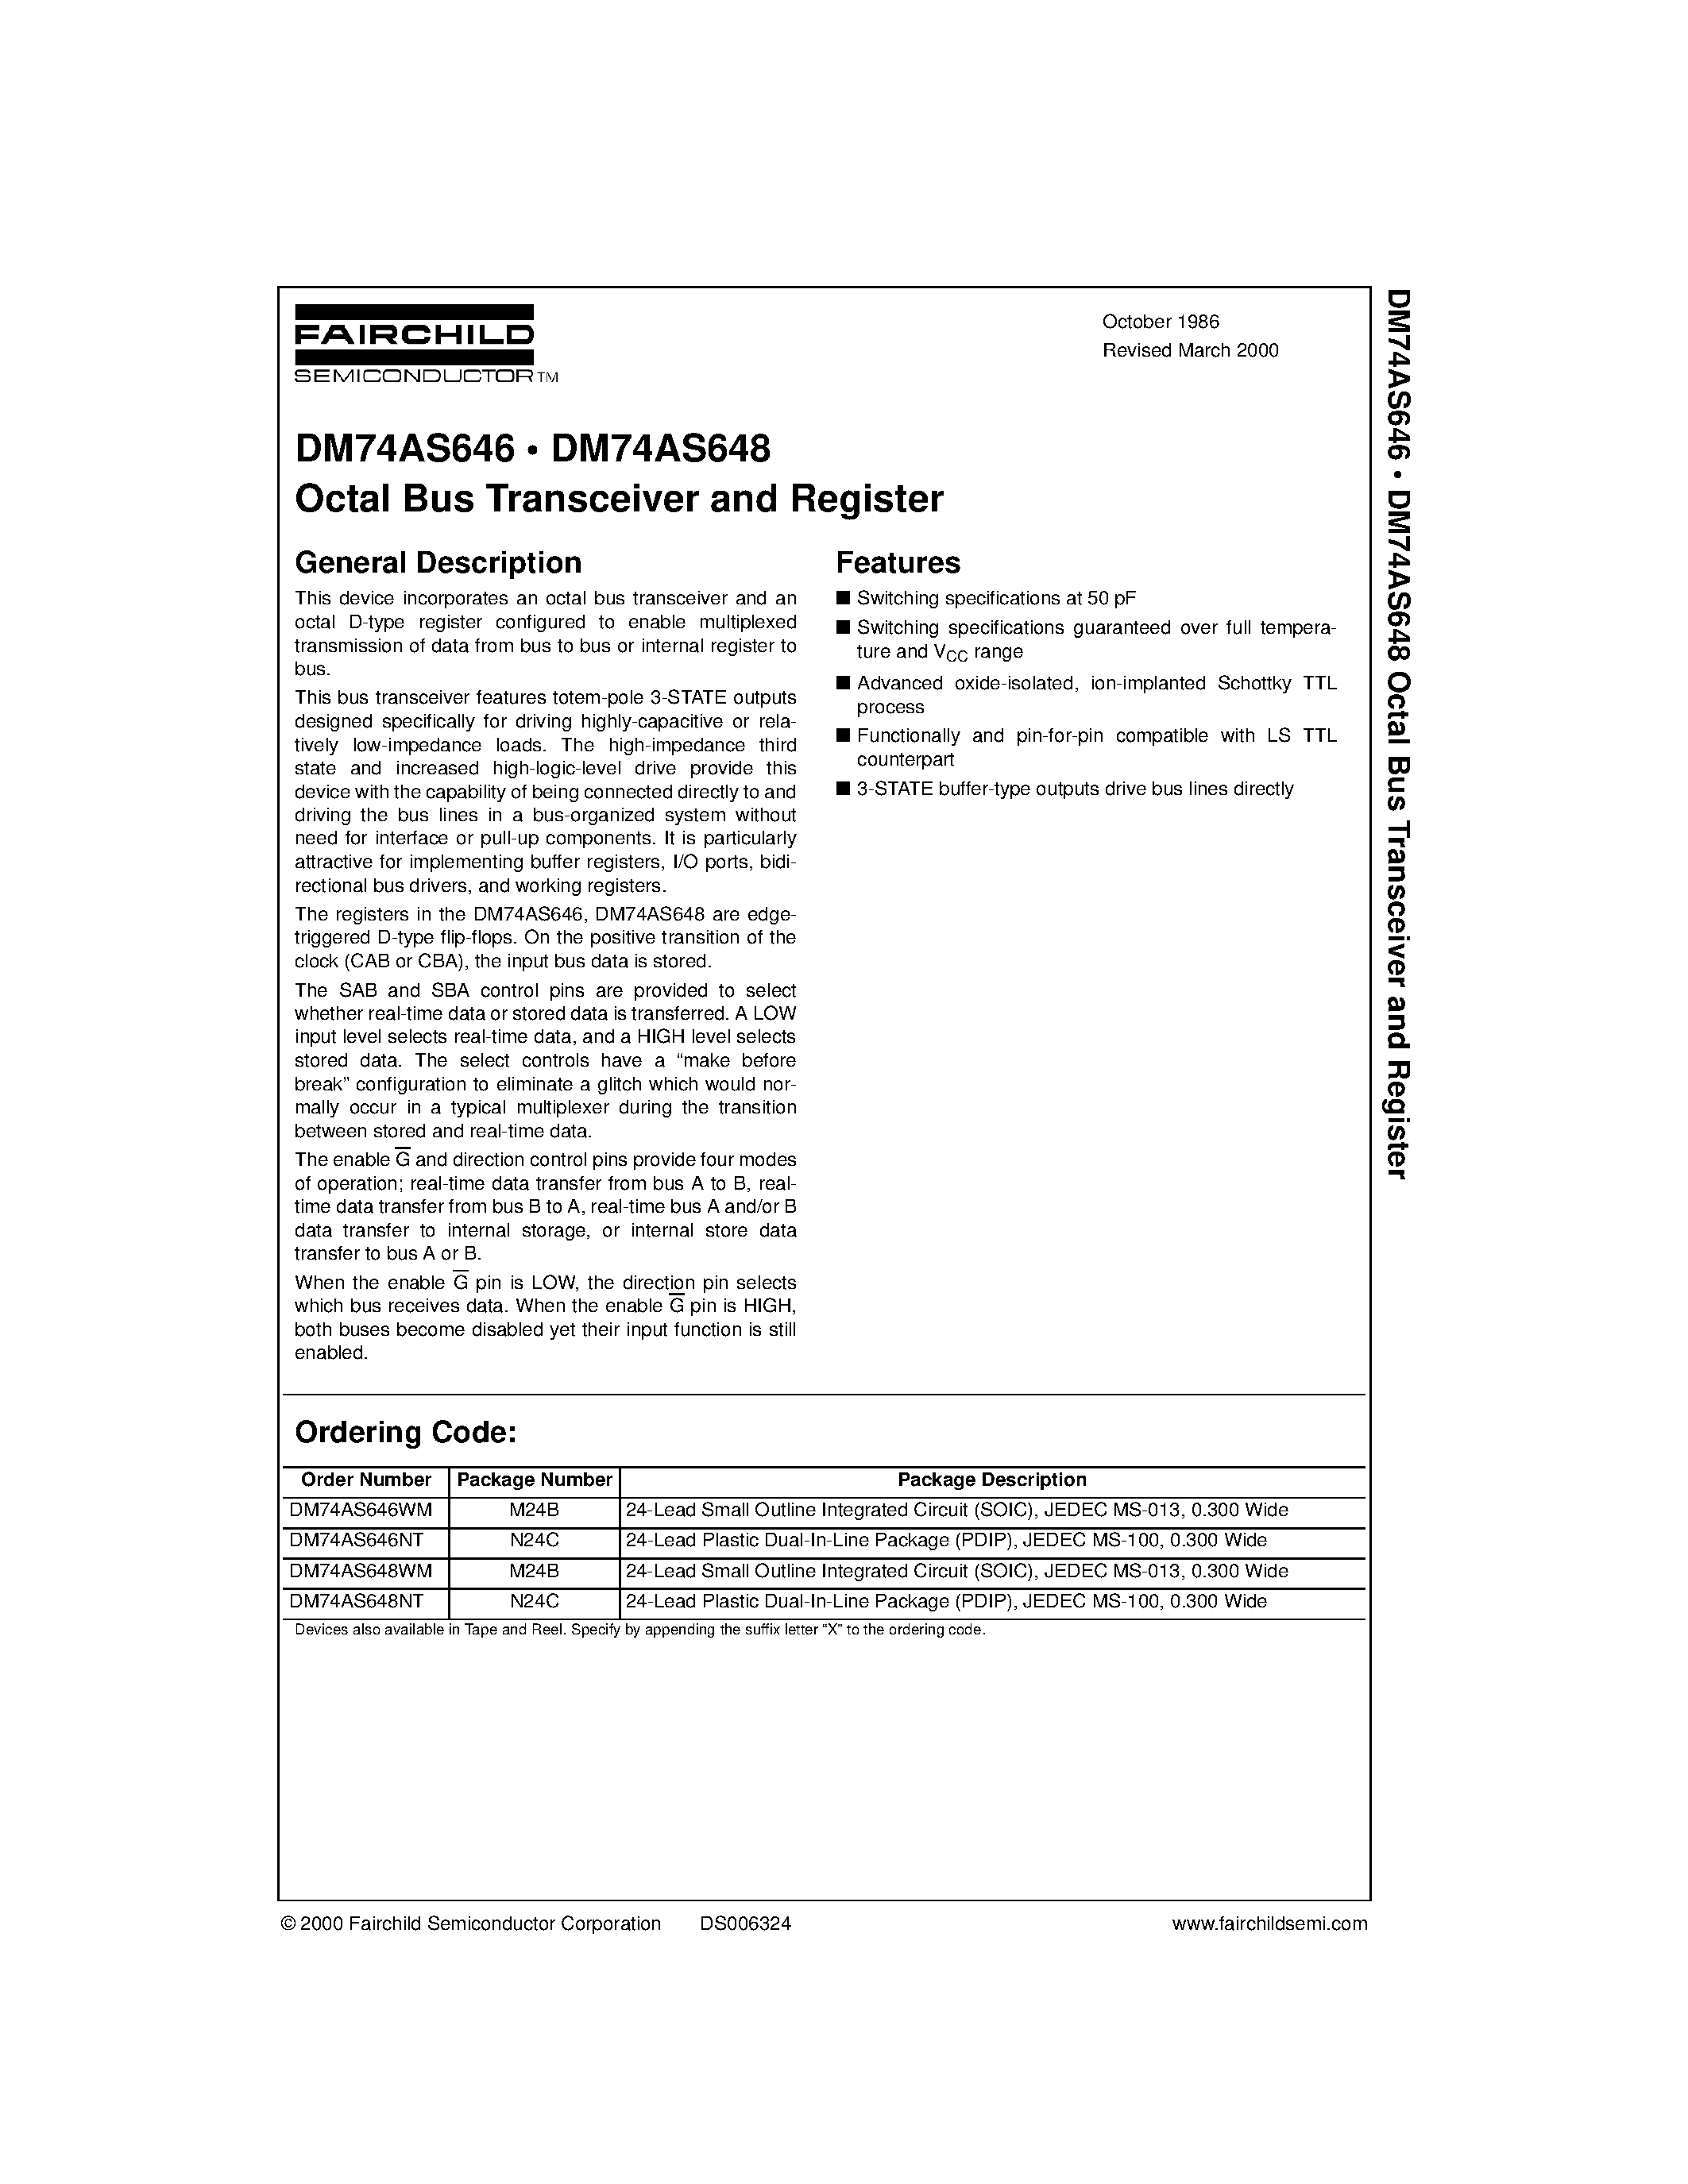 Datasheet DM74AS648WM - Octal Bus Transceiver and Register page 1